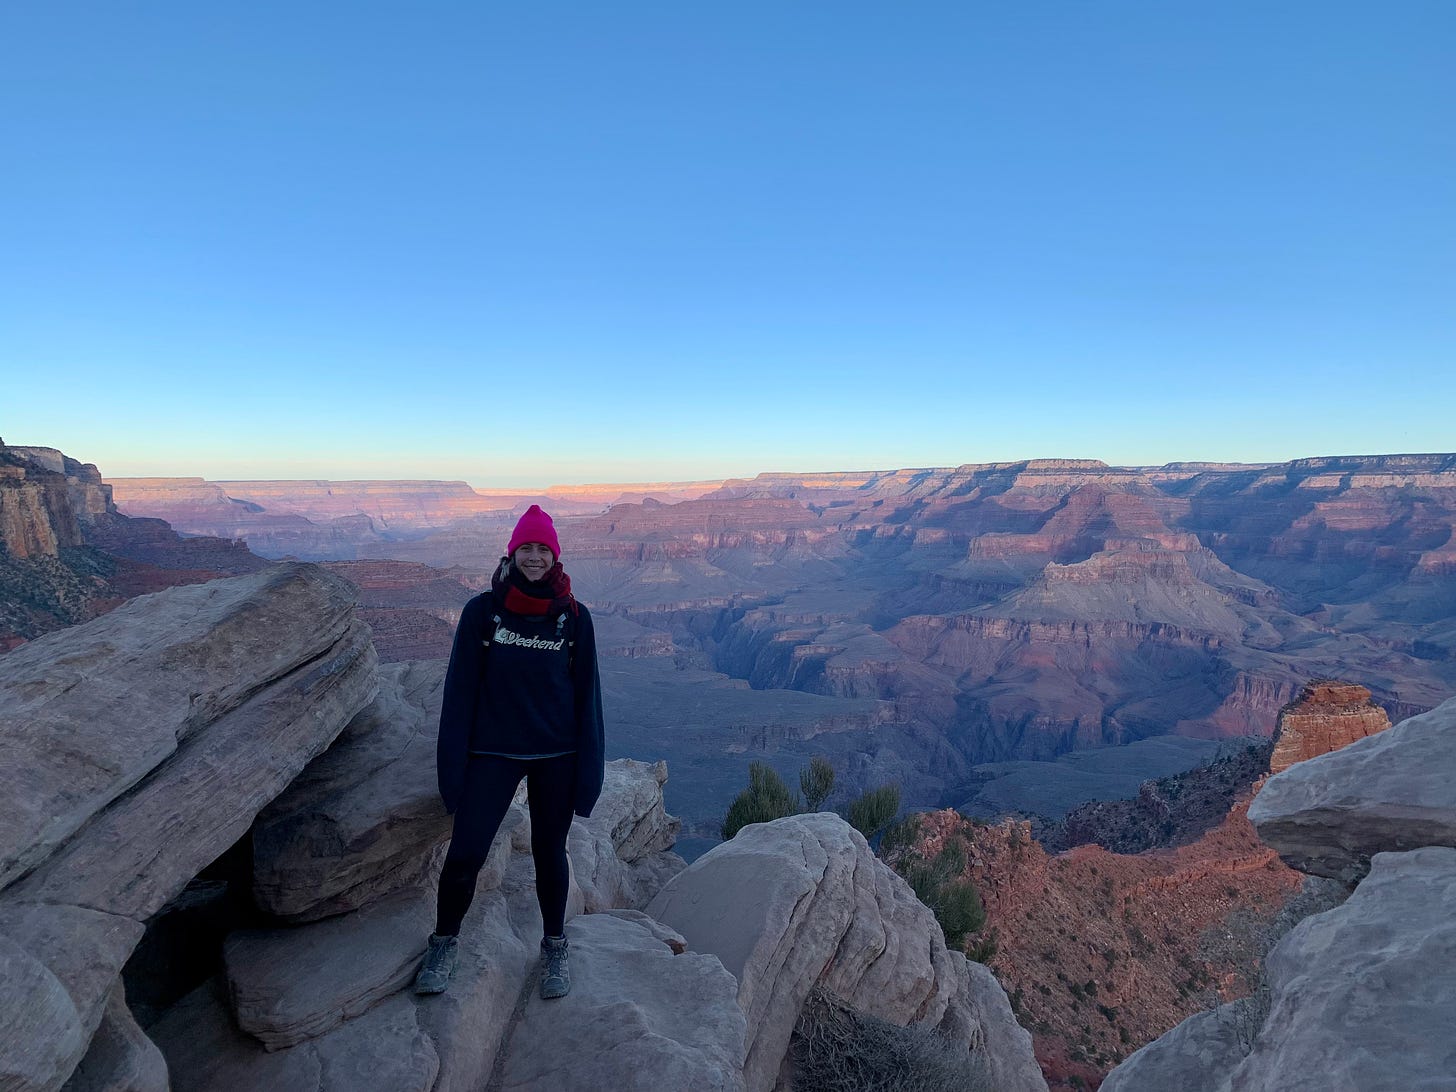 A woman stands above the Grand Canyon at dawn, a rainbow of colors appearing on the ragged landscape far below her